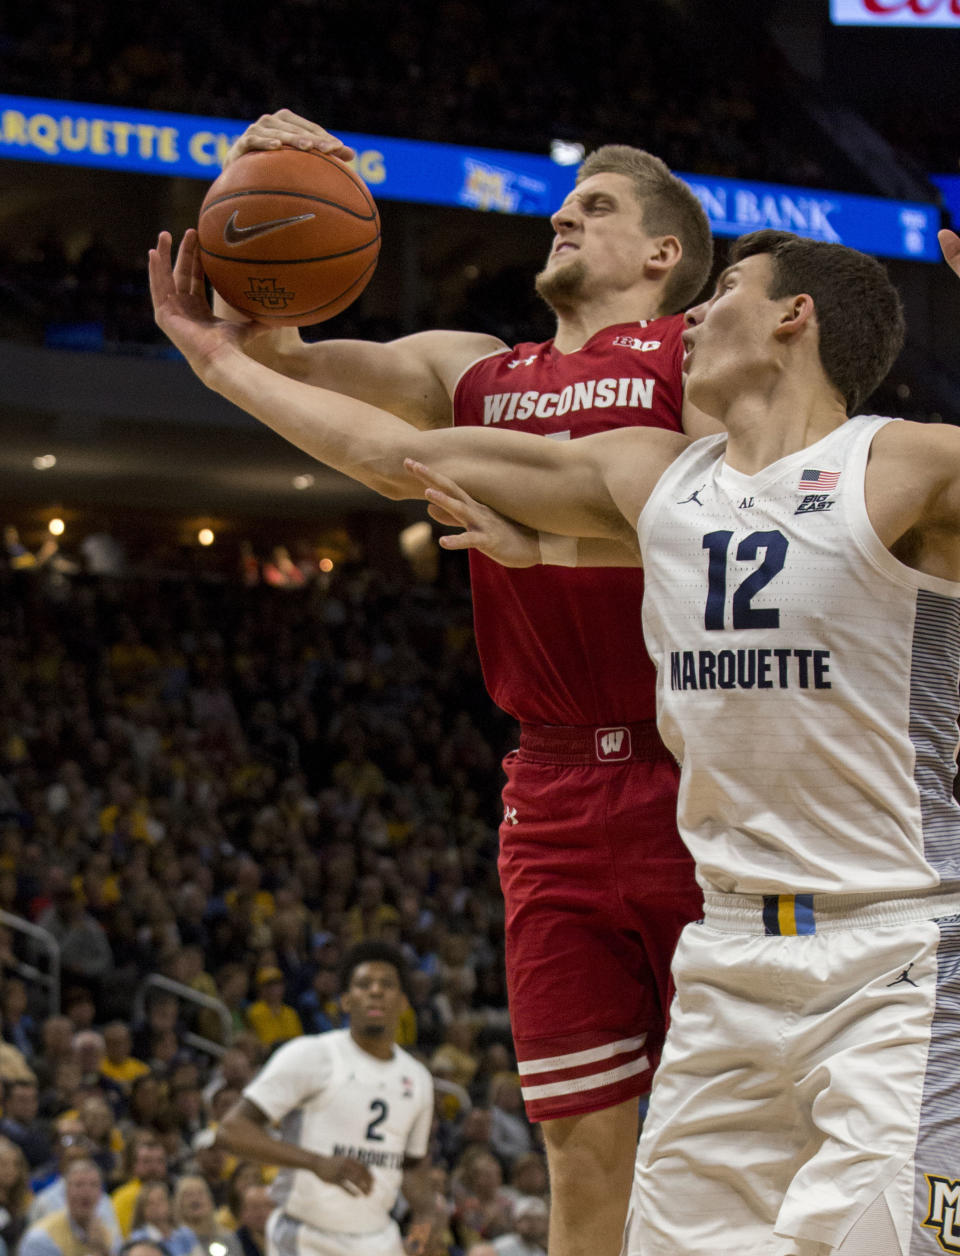 Wisconsin guard Brevin Pritzl, left, and Marquette center Matt Heldt, right, battle for the rebound during the first half of an NCAA college basketball game Saturday, Dec. 8, 2018, in Milwaukee. (AP Photo/Darren Hauck)